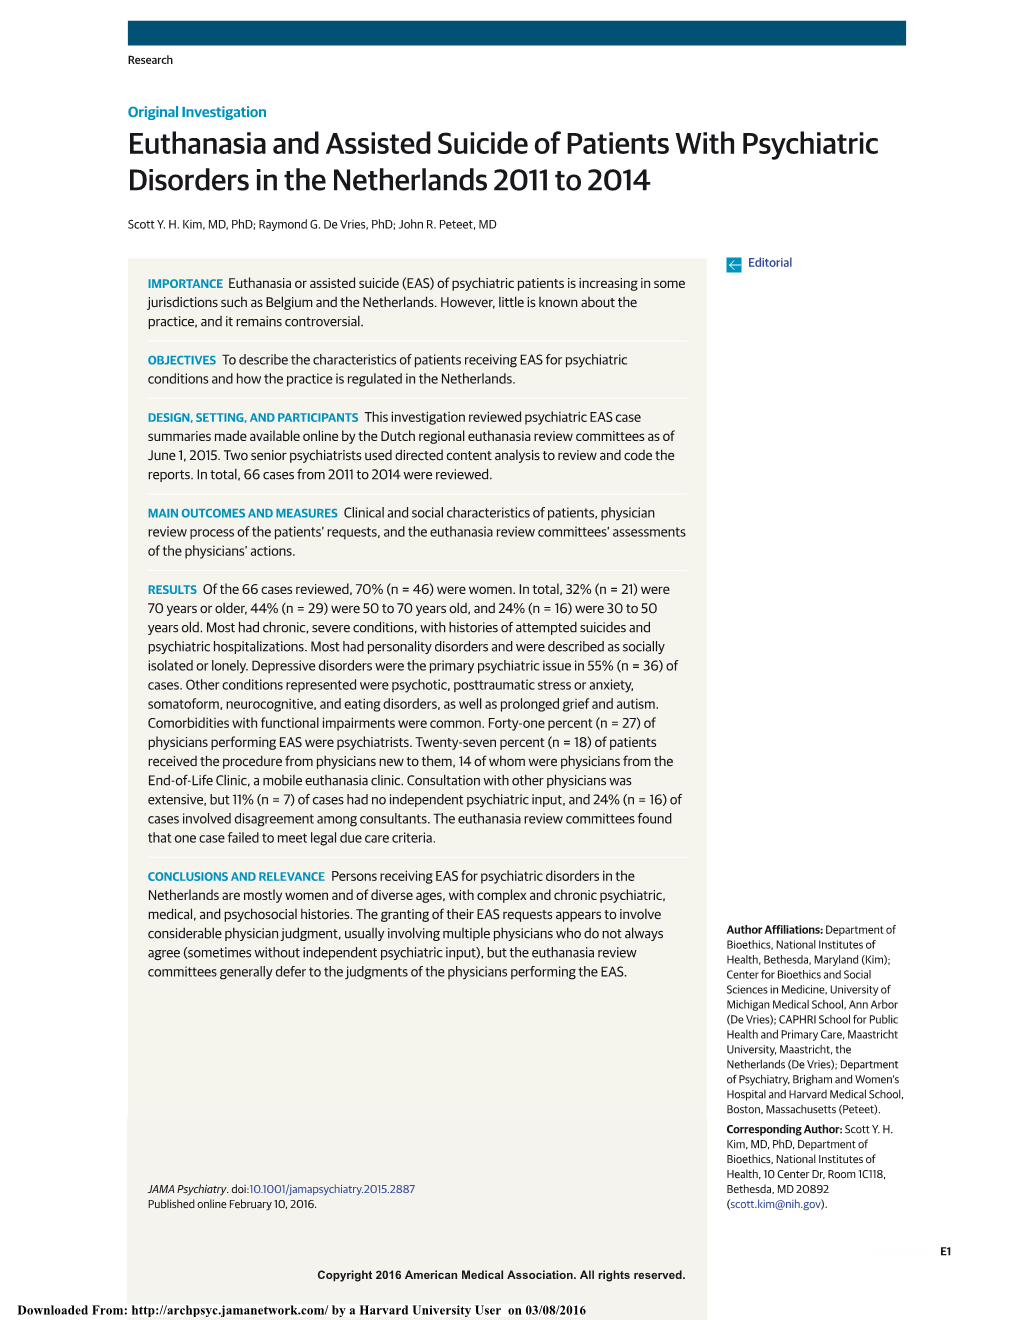 Euthanasia and Assisted Suicide of Patients with Psychiatric Disorders in the Netherlands 2011 to 2014